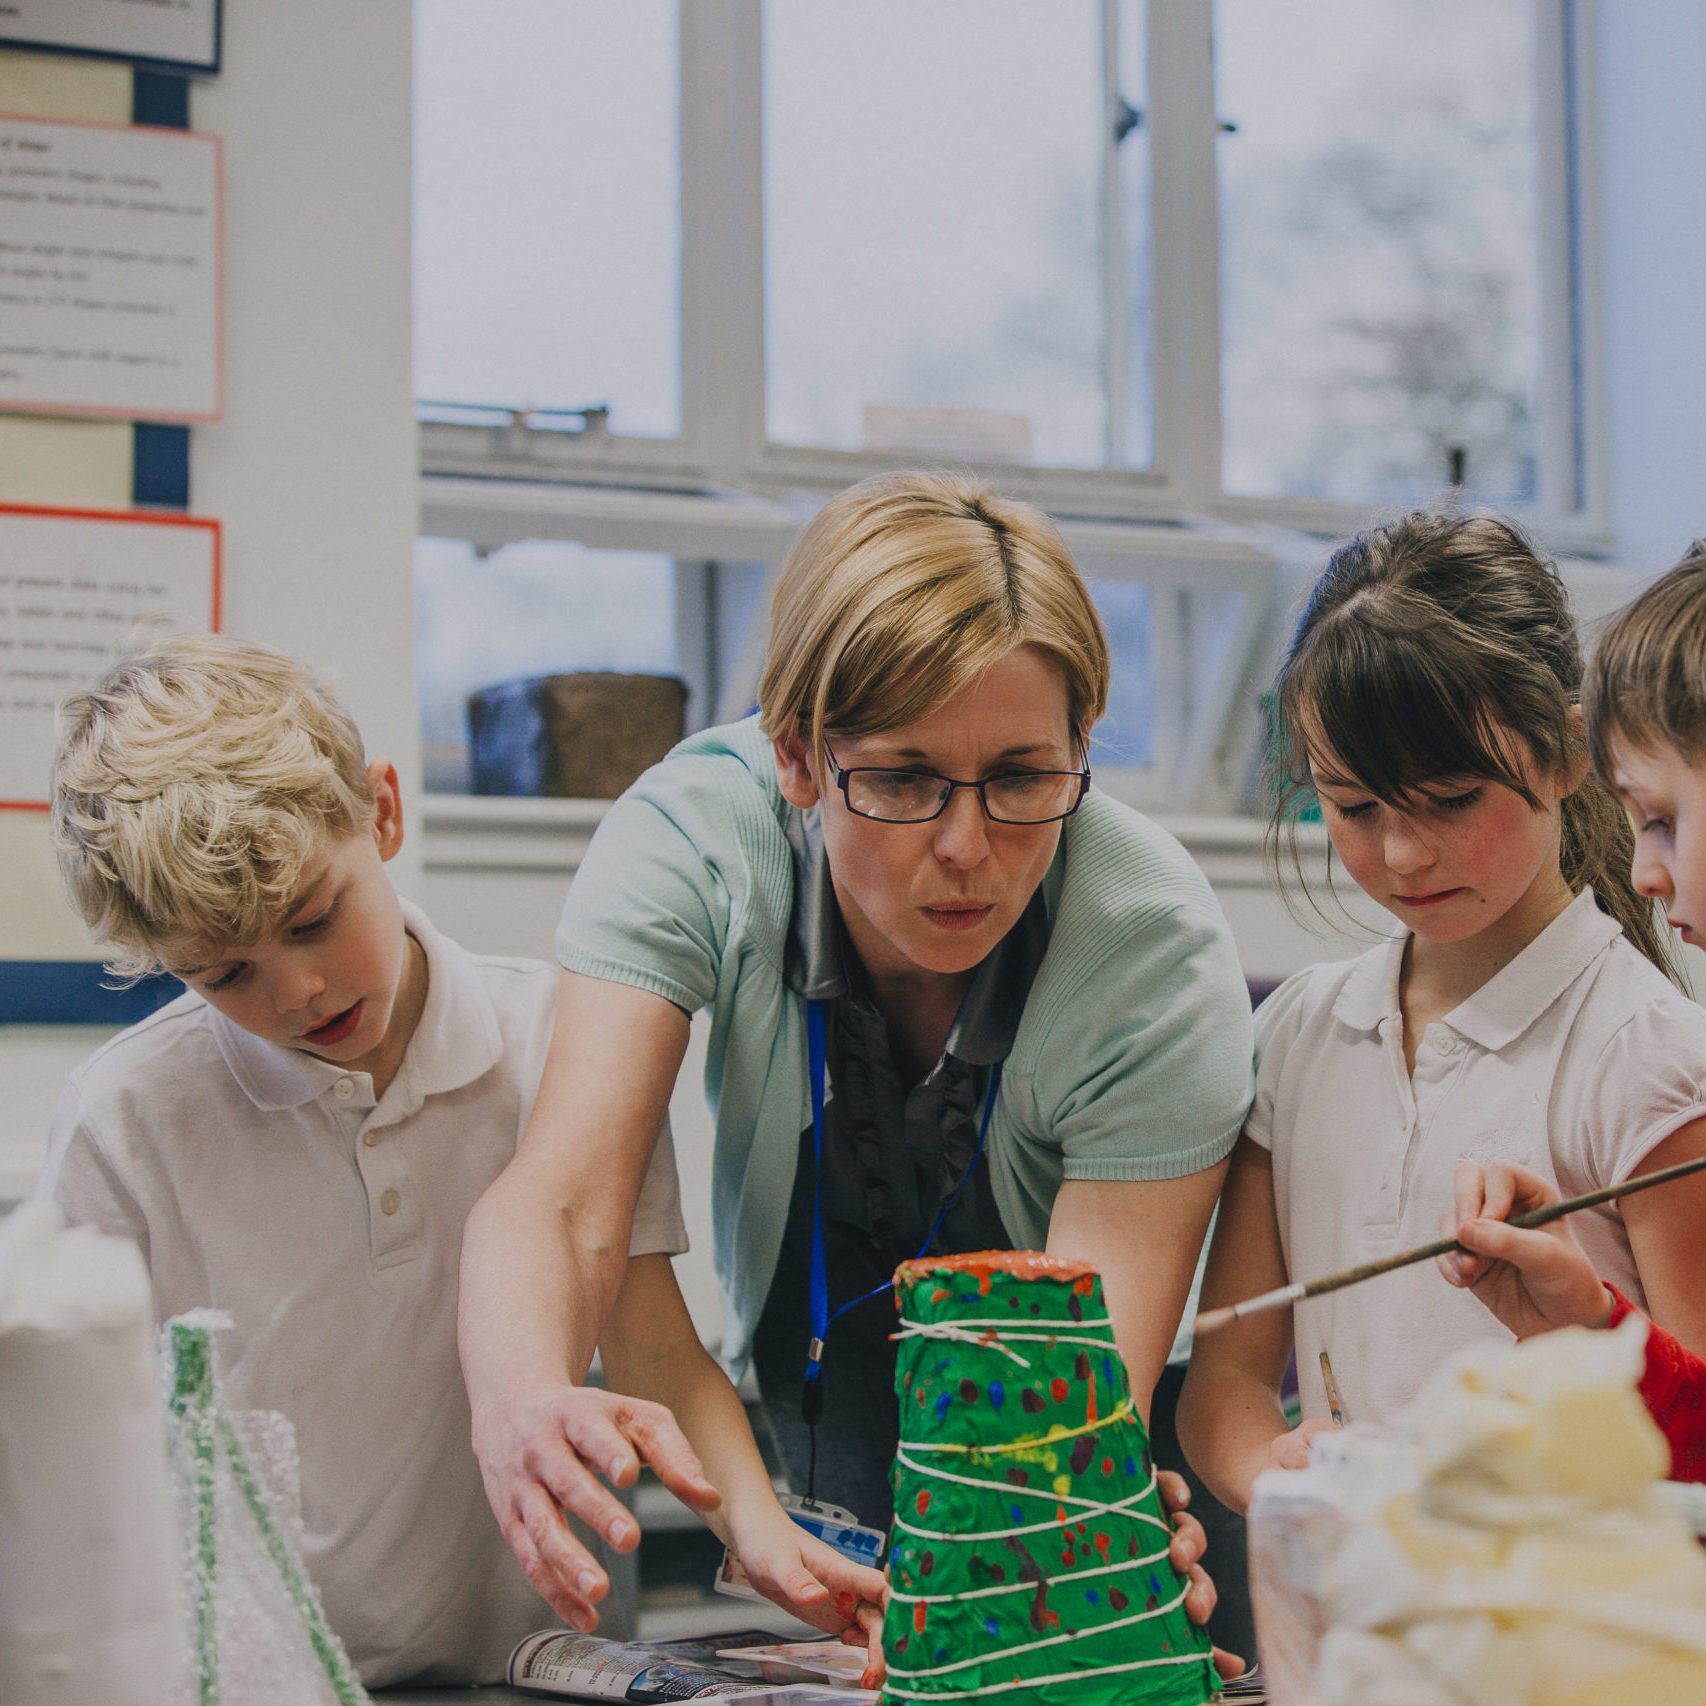 Aiming Higher: Improving Science Education in Victorian Schools